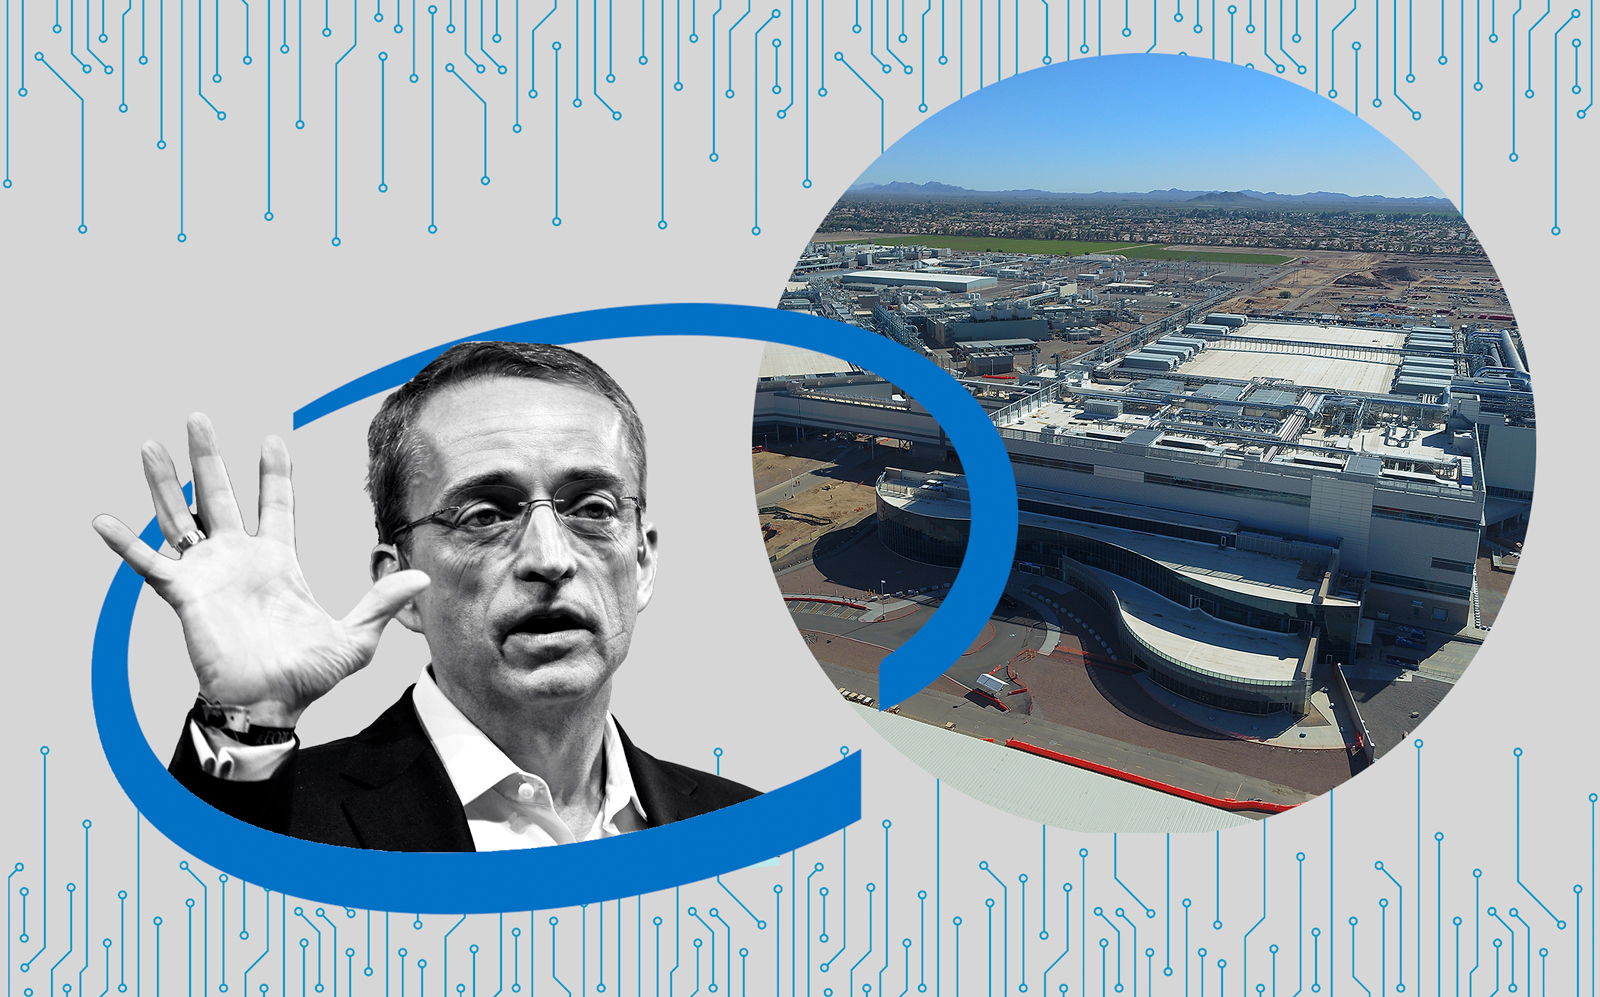 Intel CEO Pat Gelsinger and an aerial of the Arizona campus in Chandler, Arizona (Getty, Bussinesswire/Berkshire Hathaway)